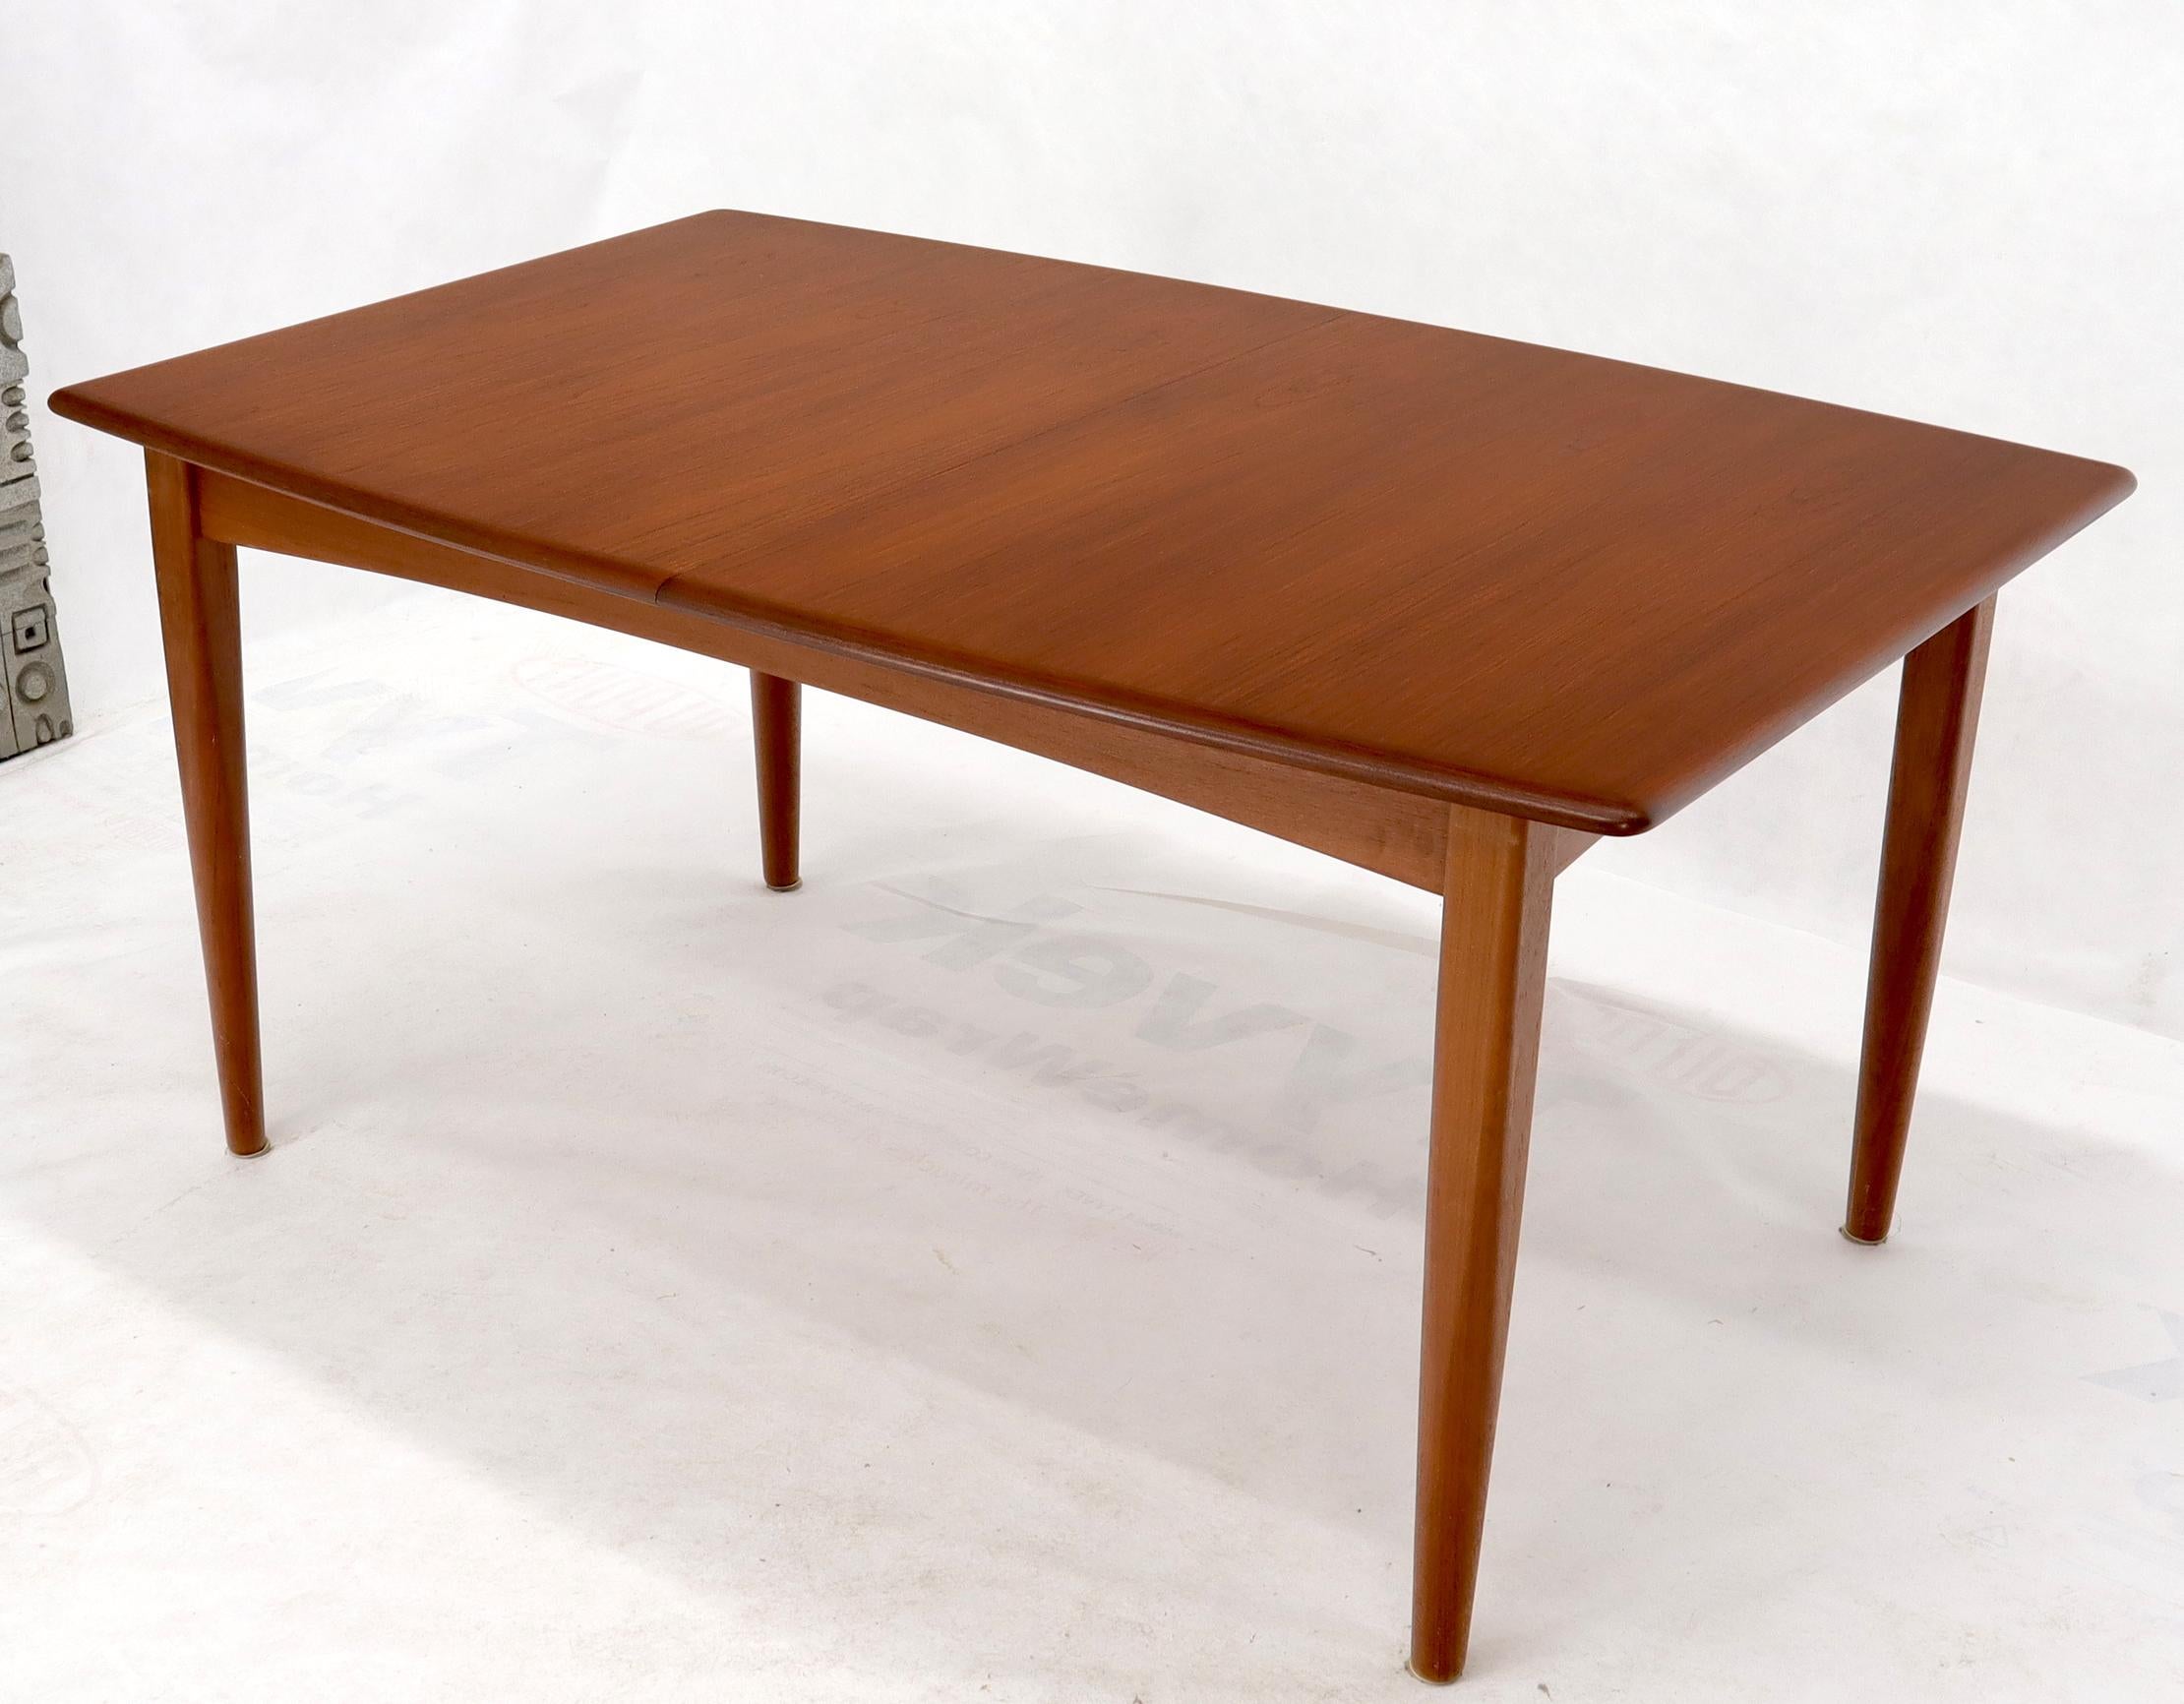 Danish Mid-Century Modern Teak Dining Table with Two Pop Up Self Storing Leaves For Sale 1